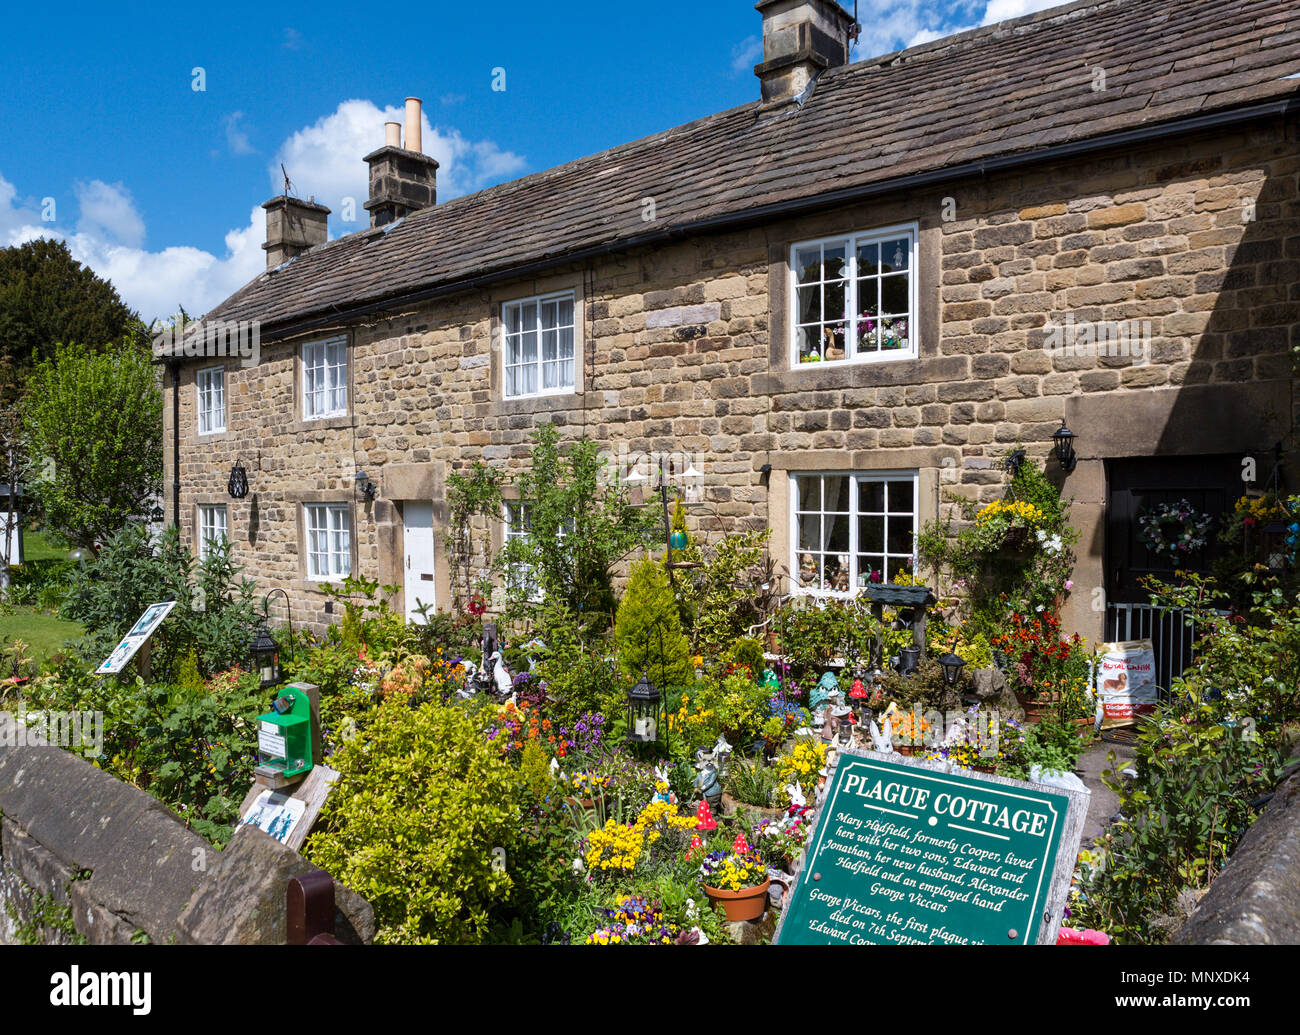 Plague Cottages in Eyam, Peak District, Derbyshire, England, UK. Eyam is sometimes referred to as the Plague Village. Stock Photo